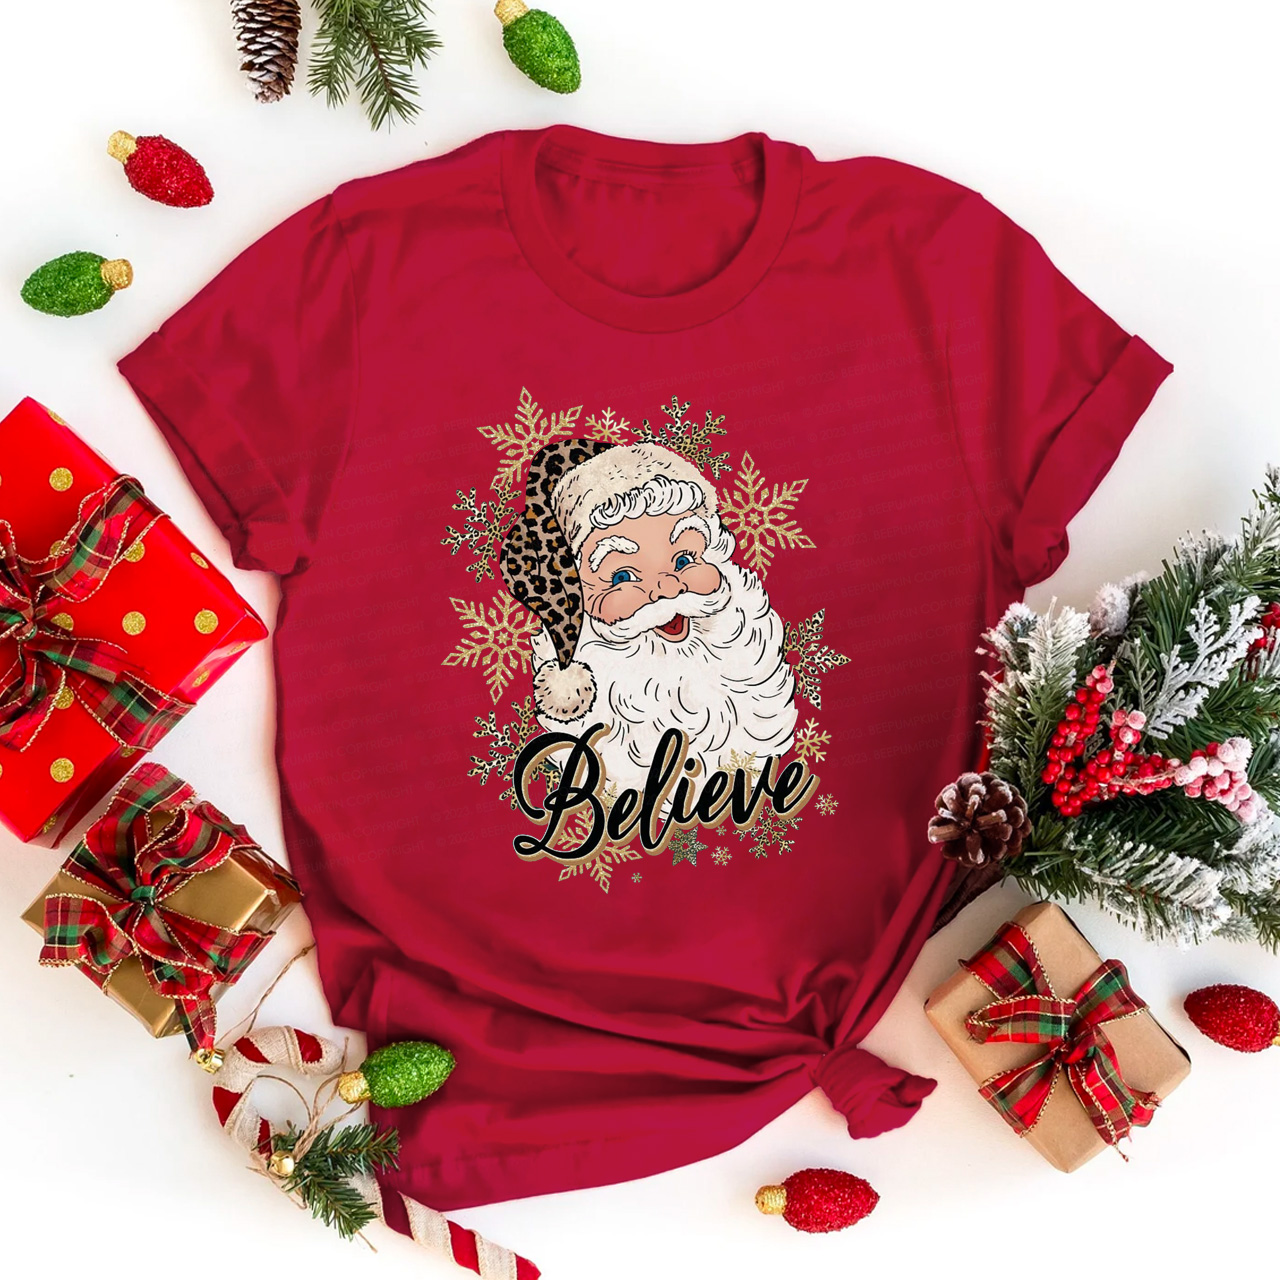 Believe Christmas Party Shirt For Her